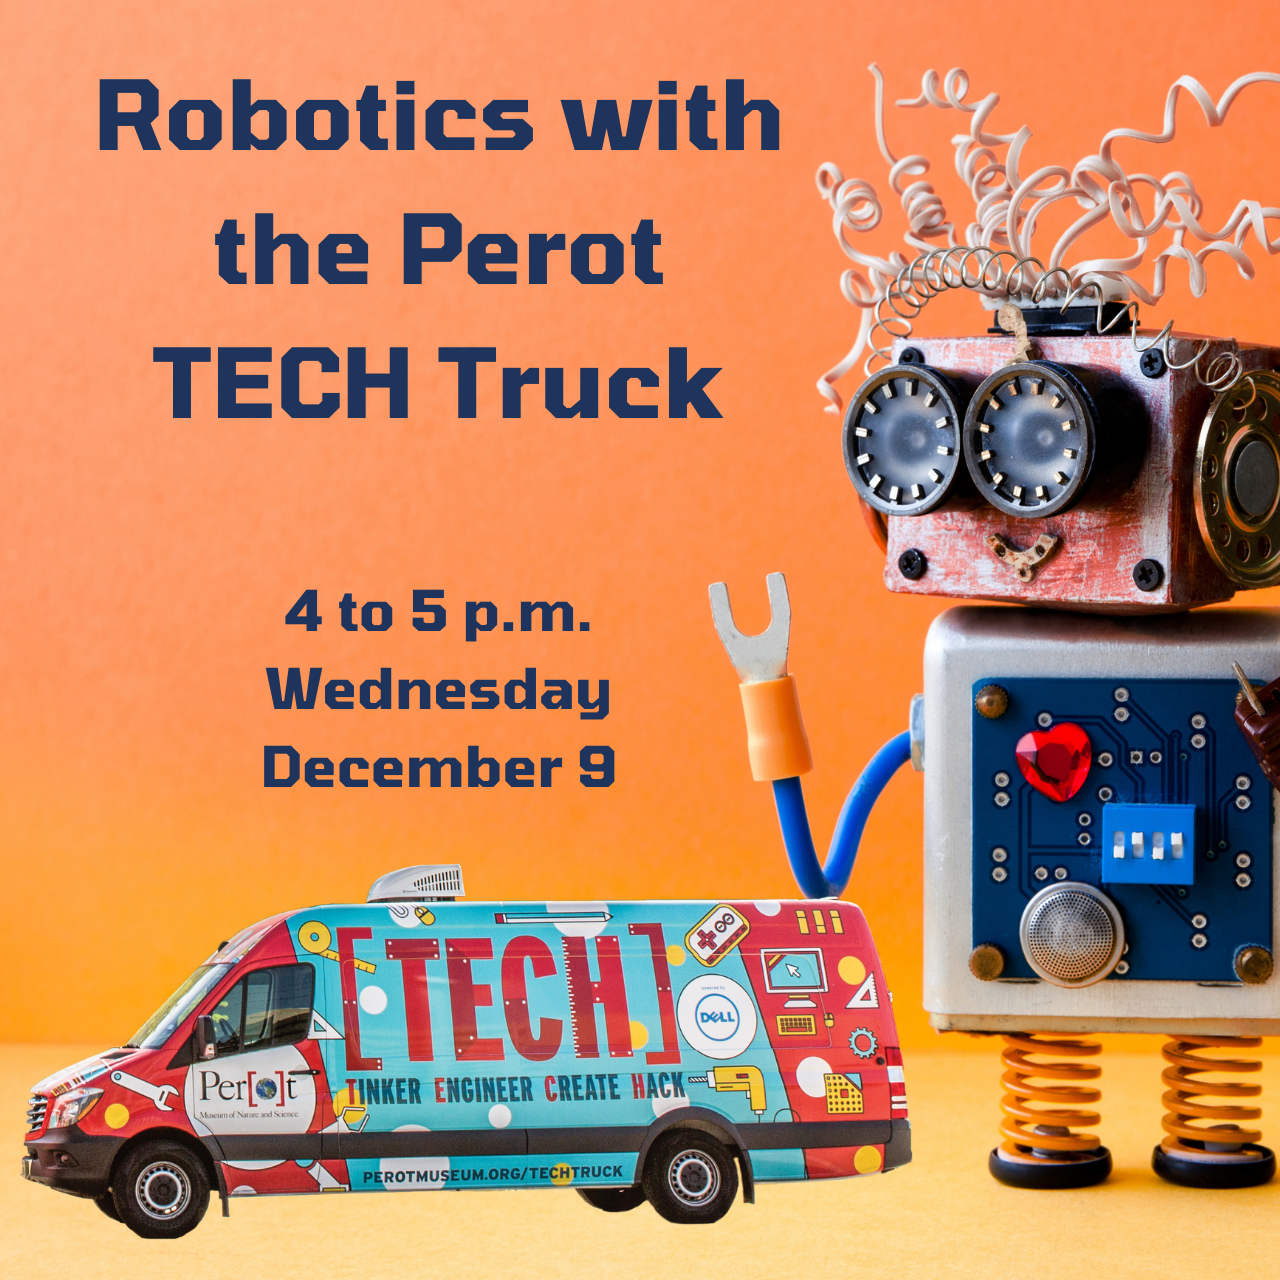 Robotics with the Perot Tech Truck